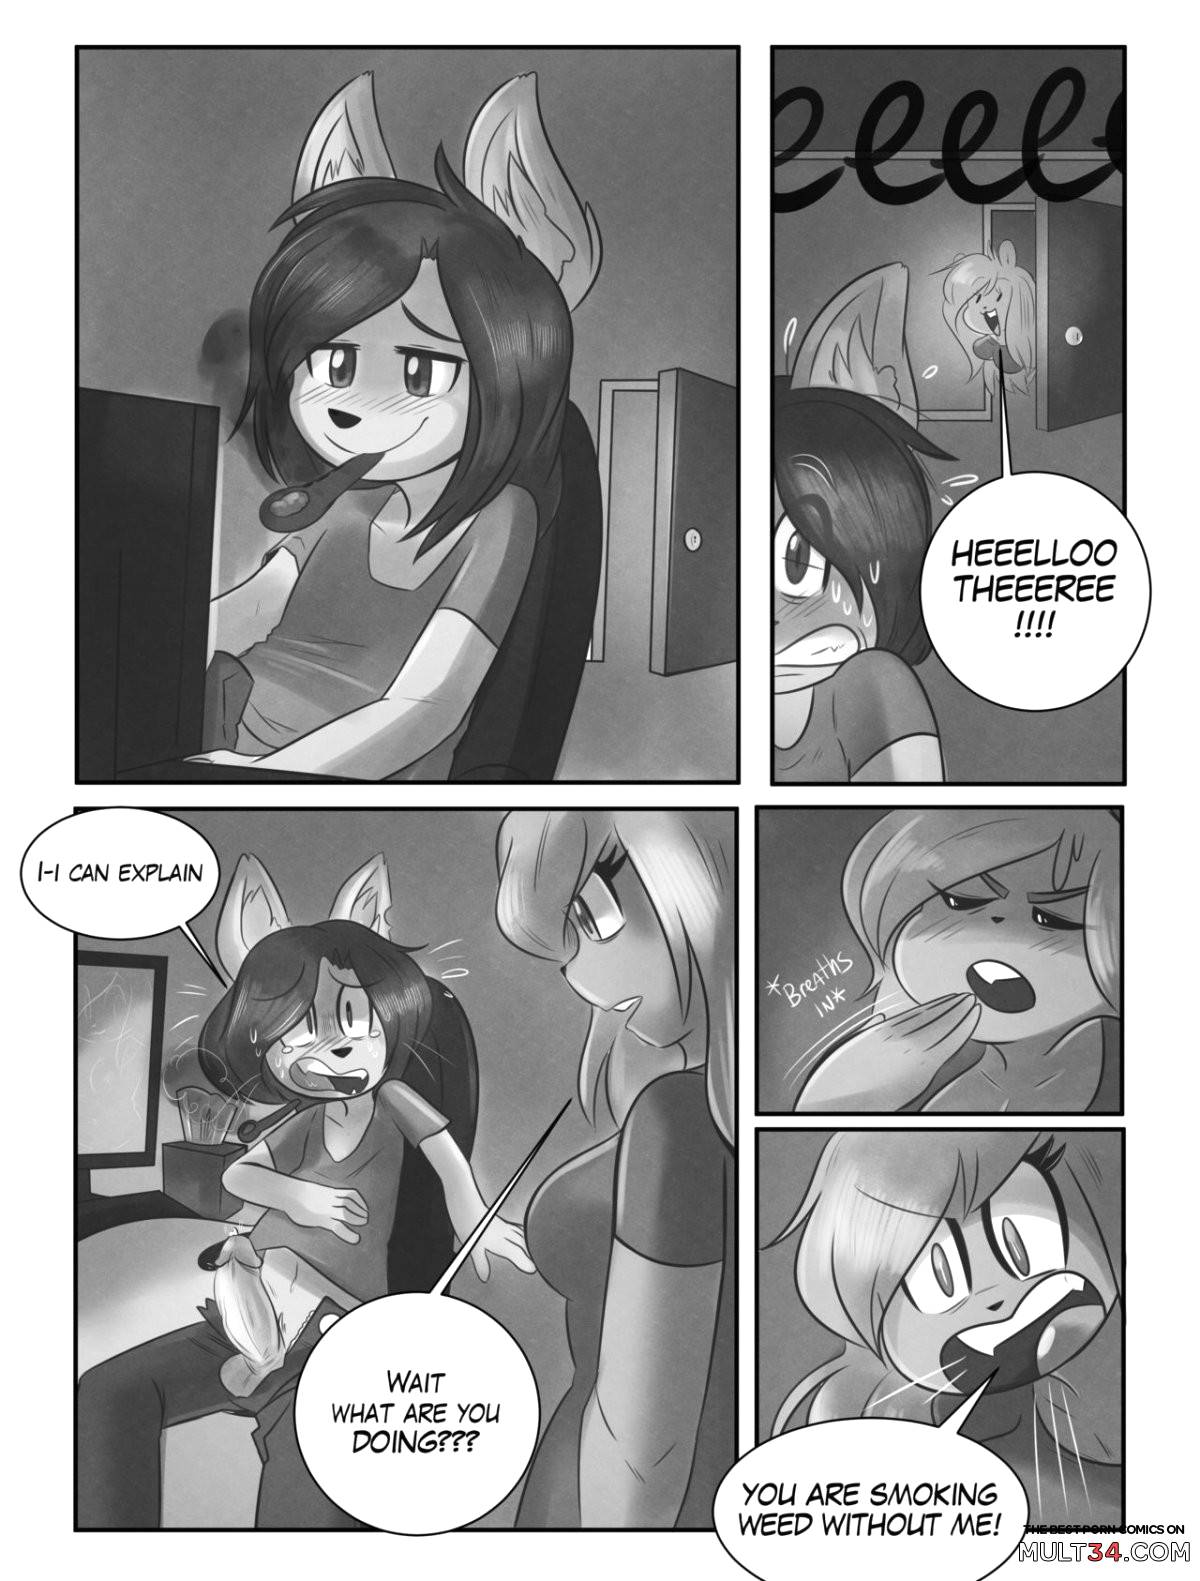 Don't You Ever Knock!? page 1